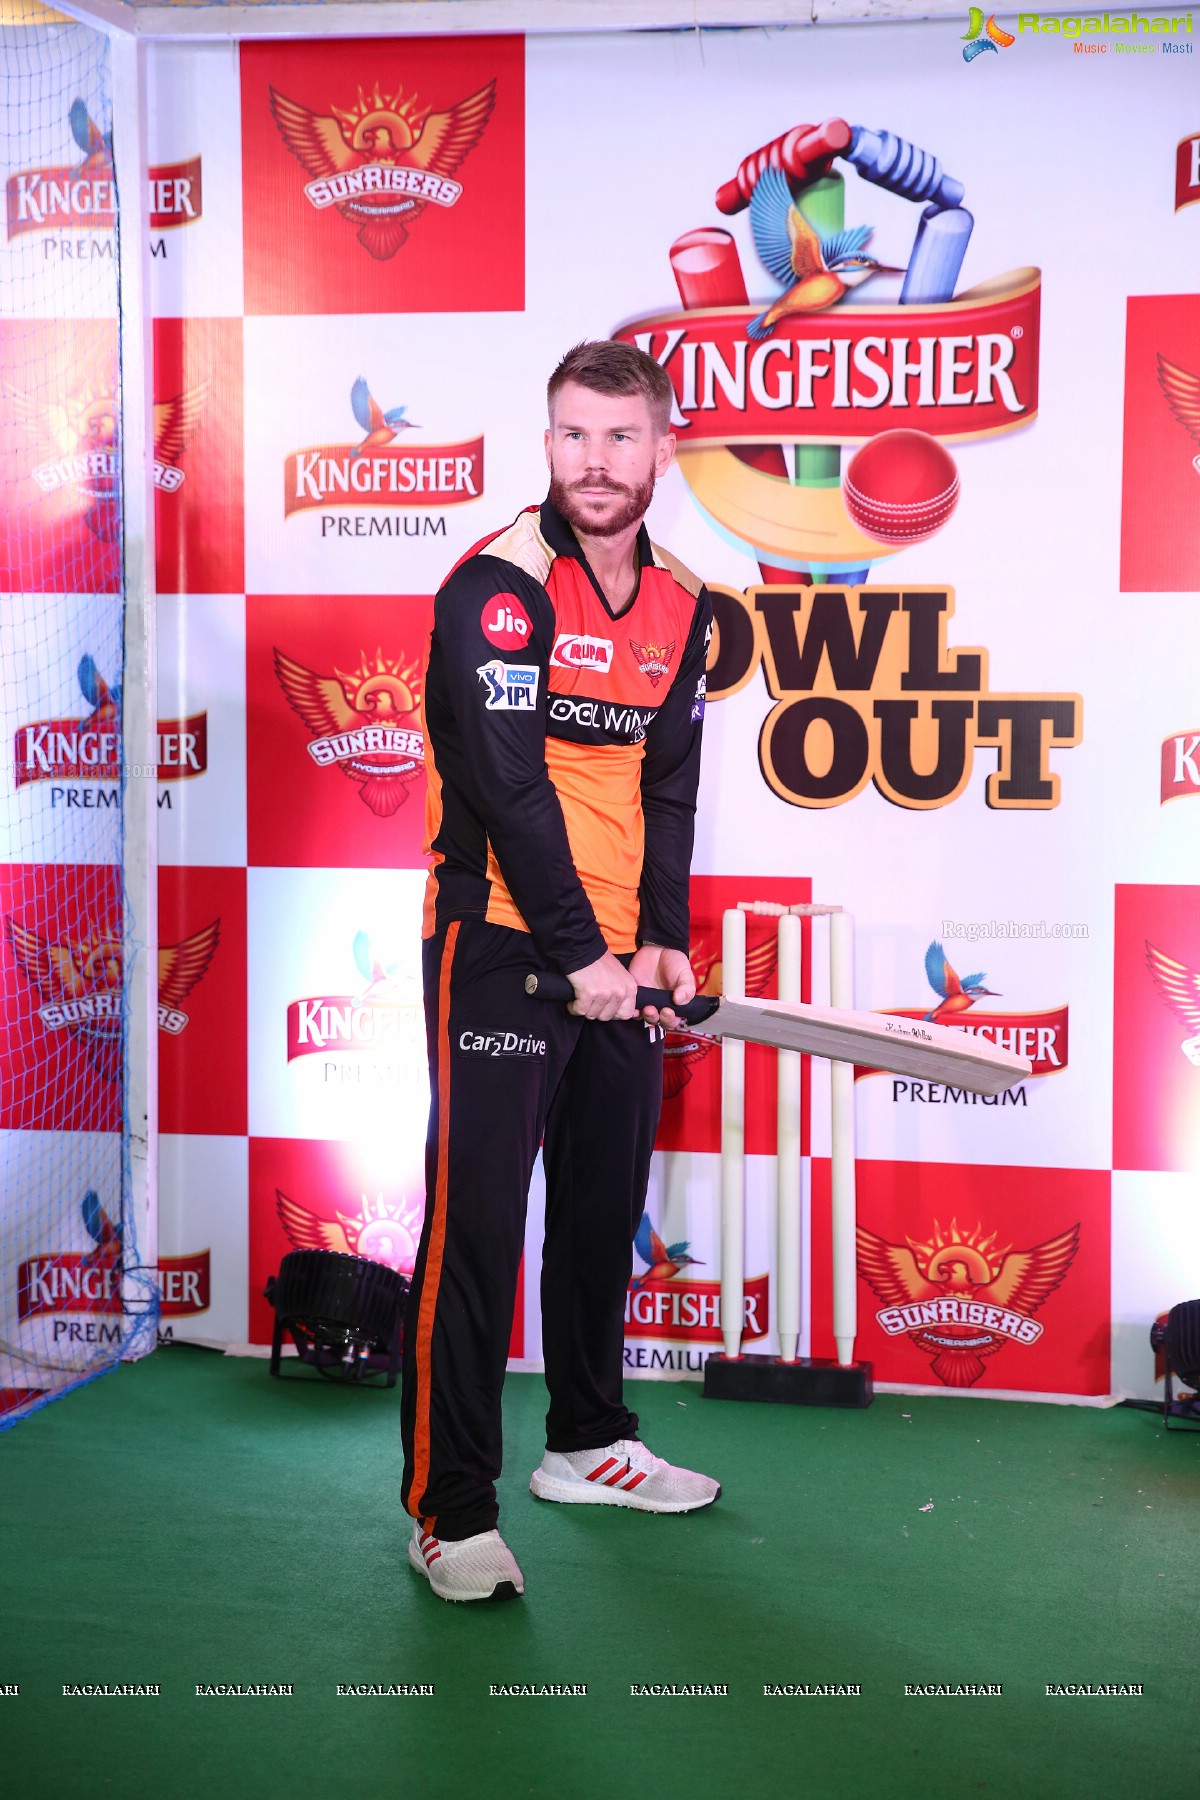 ‘Kingfisher Bowl Out’ Gives Sunrisers Hyderabad Fans a Lucky Chance At Inorbit Mall In Hyderabad